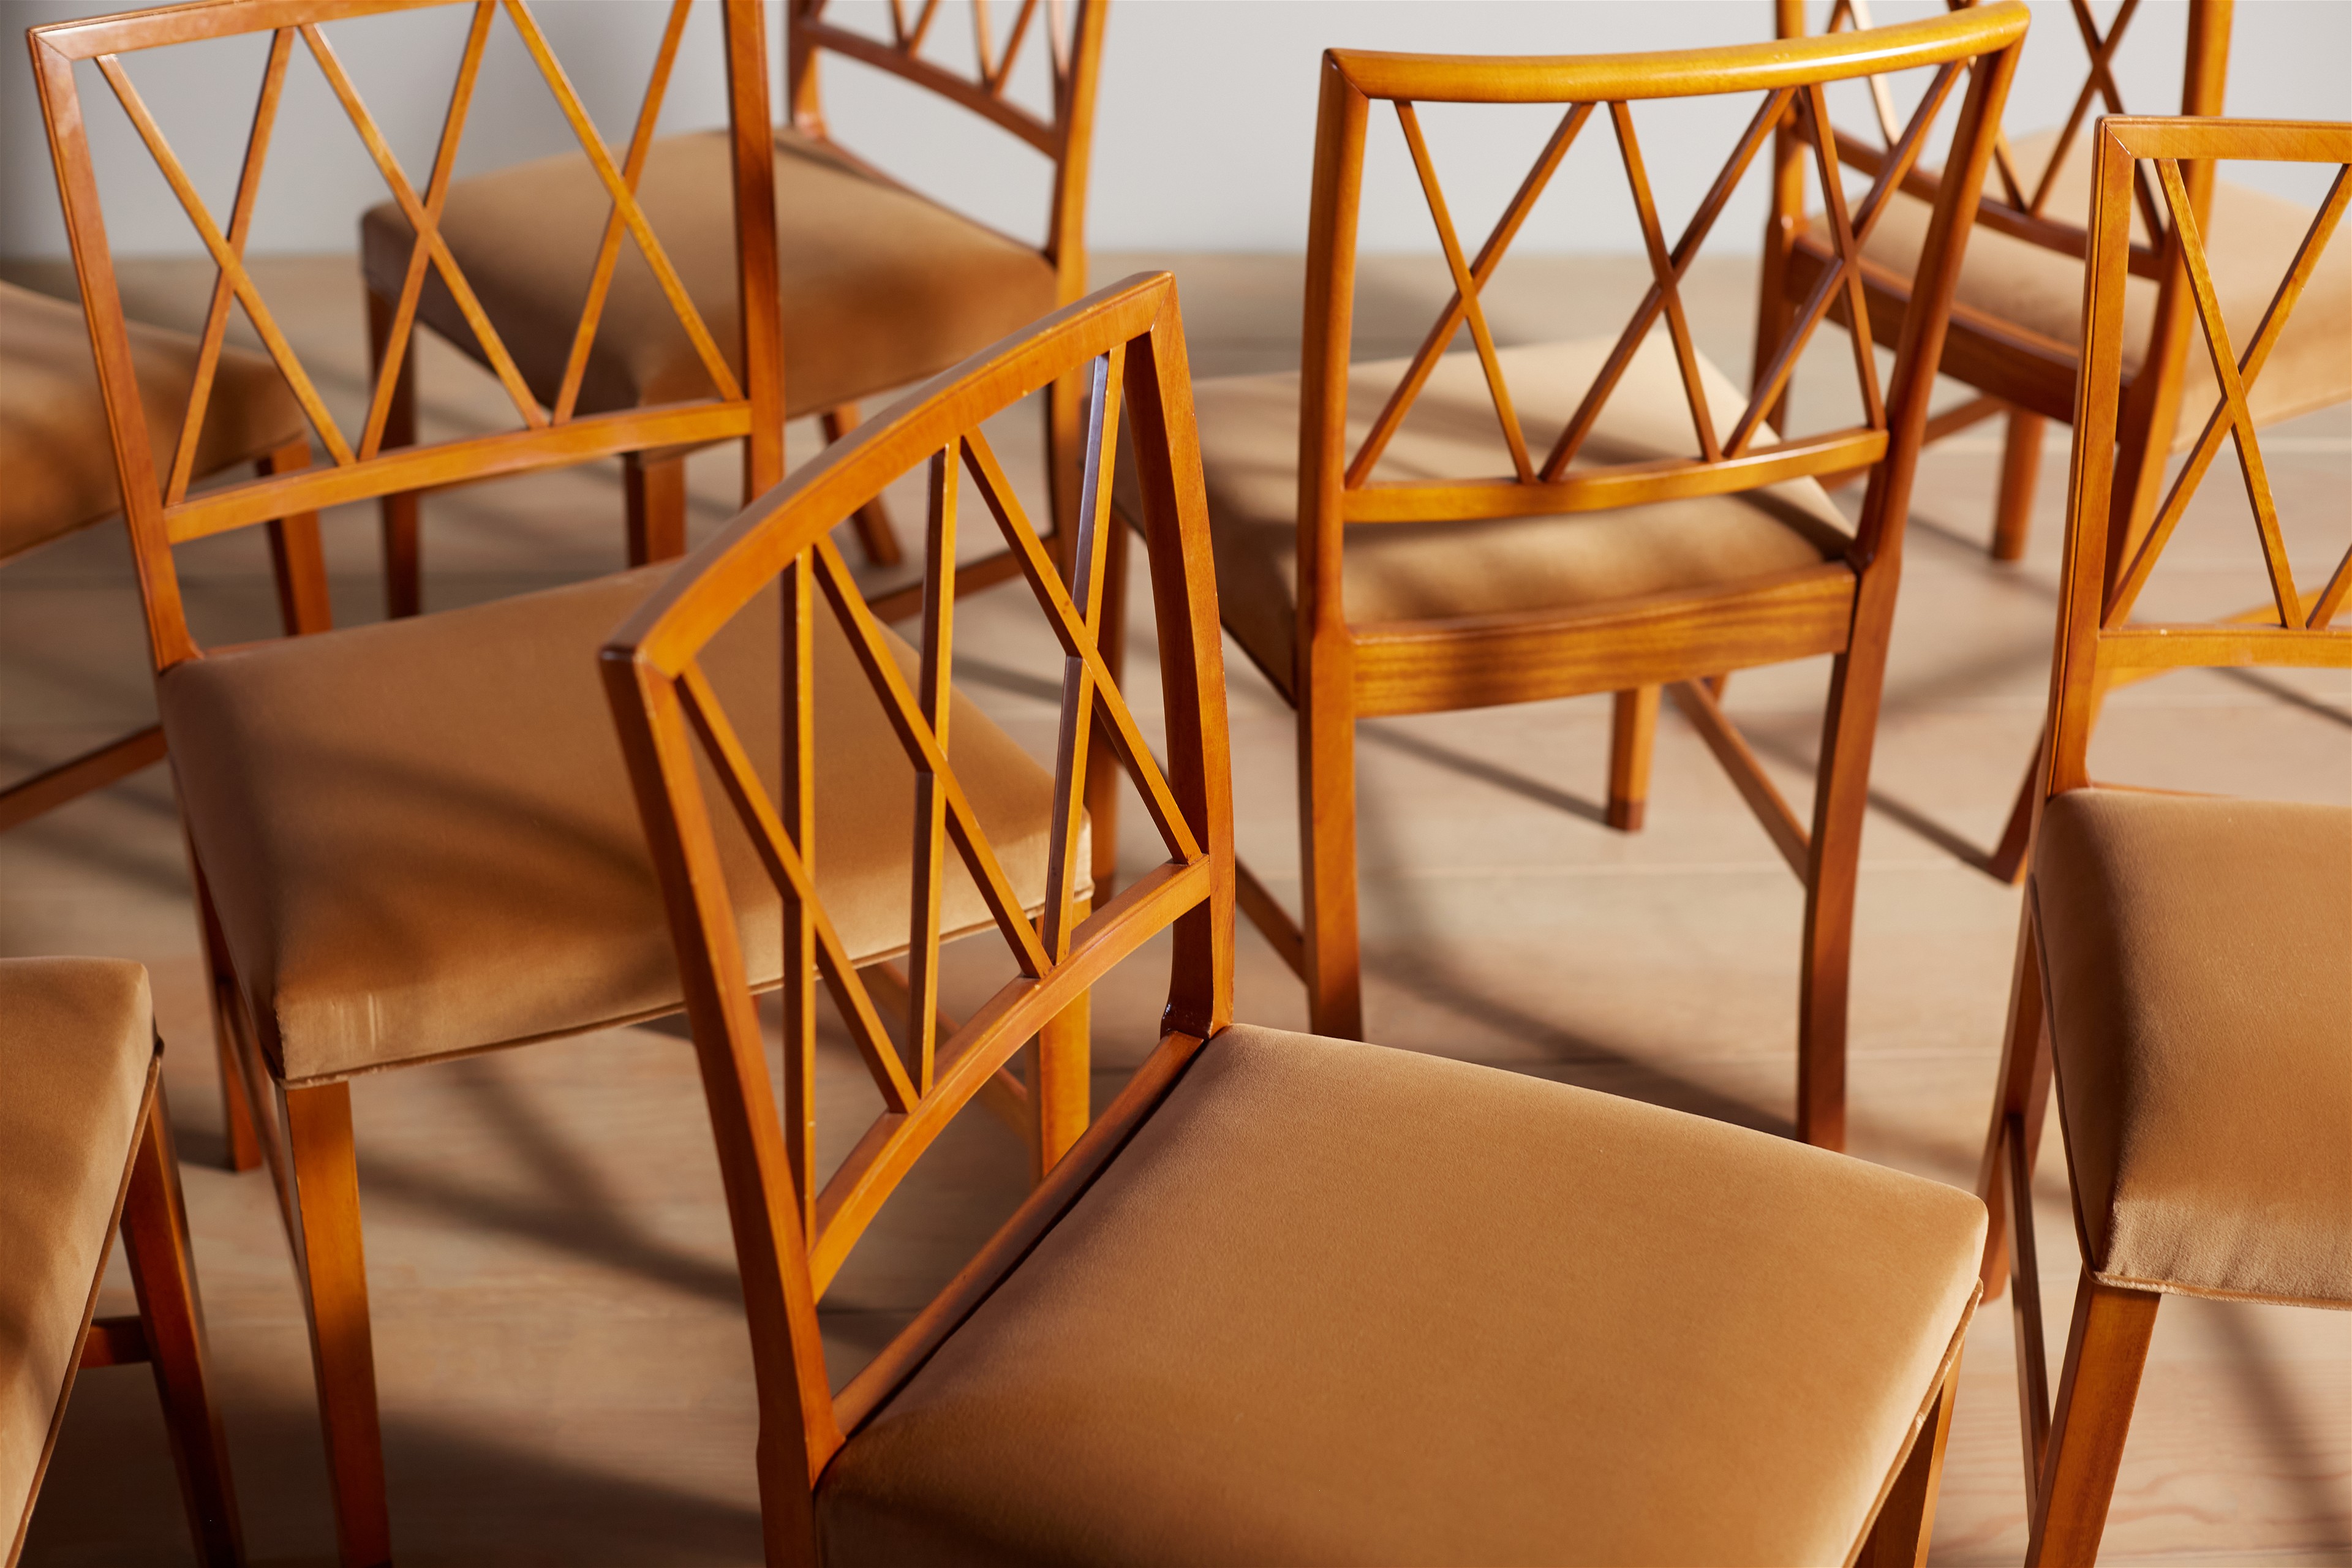 a group of wooden chairs sitting next to each other